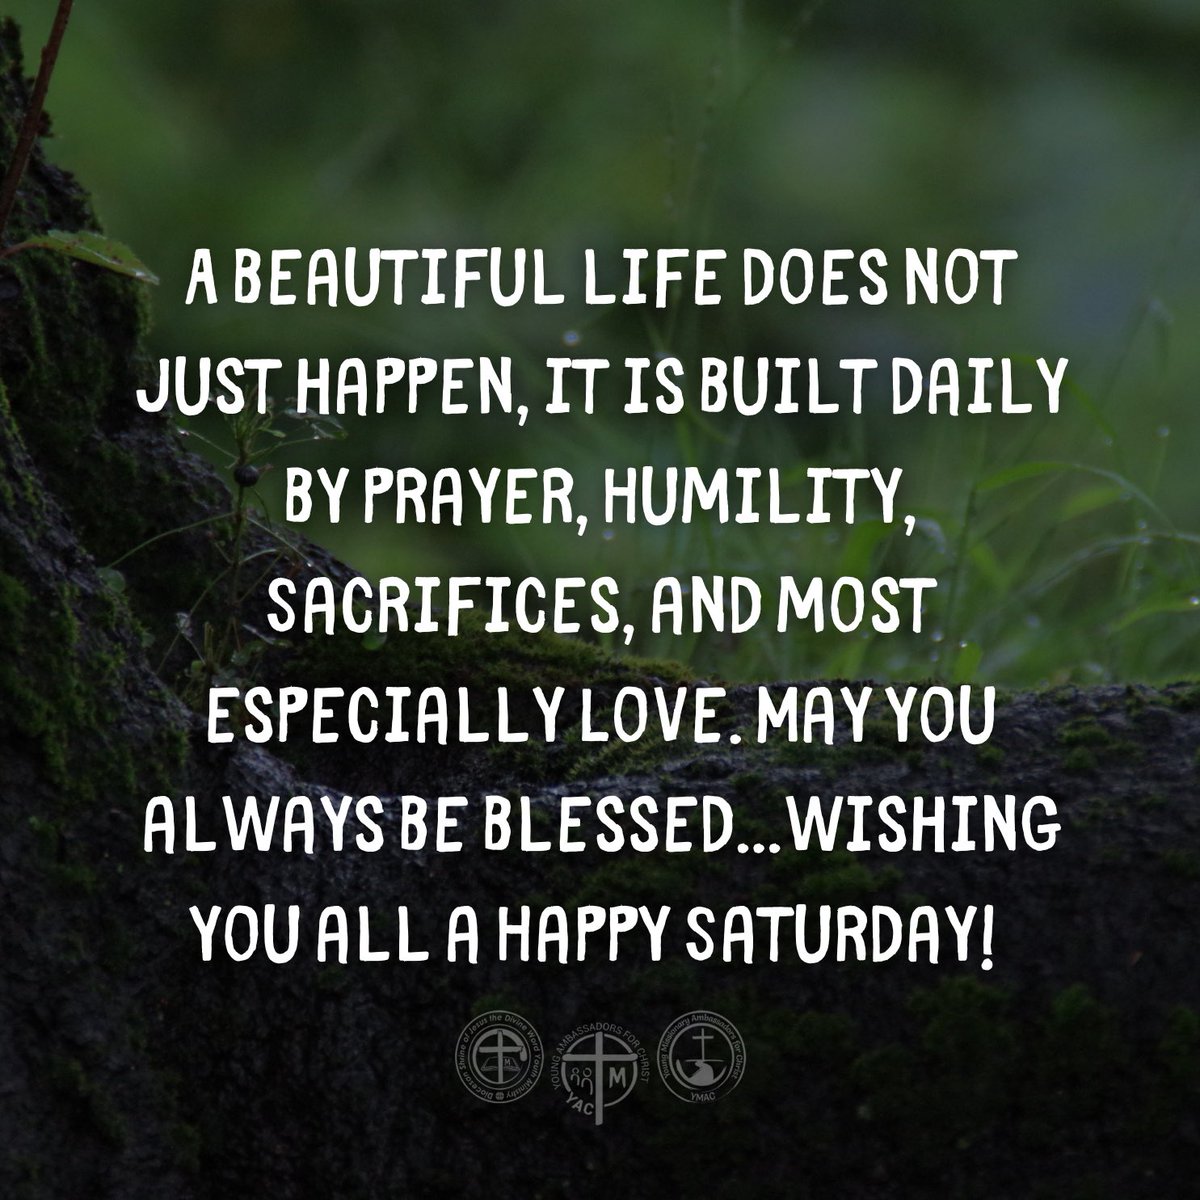 A beautiful life does not just happen, it is built daily by Prayer, Humility, Sacrifices, and most especially Love. May you always be blessed…Wishing you all a Happy Saturday! 

***

#YAC #YMAC #SYM #SVDyouth 
#SHRINEyouthMinistry #ShrineYouth